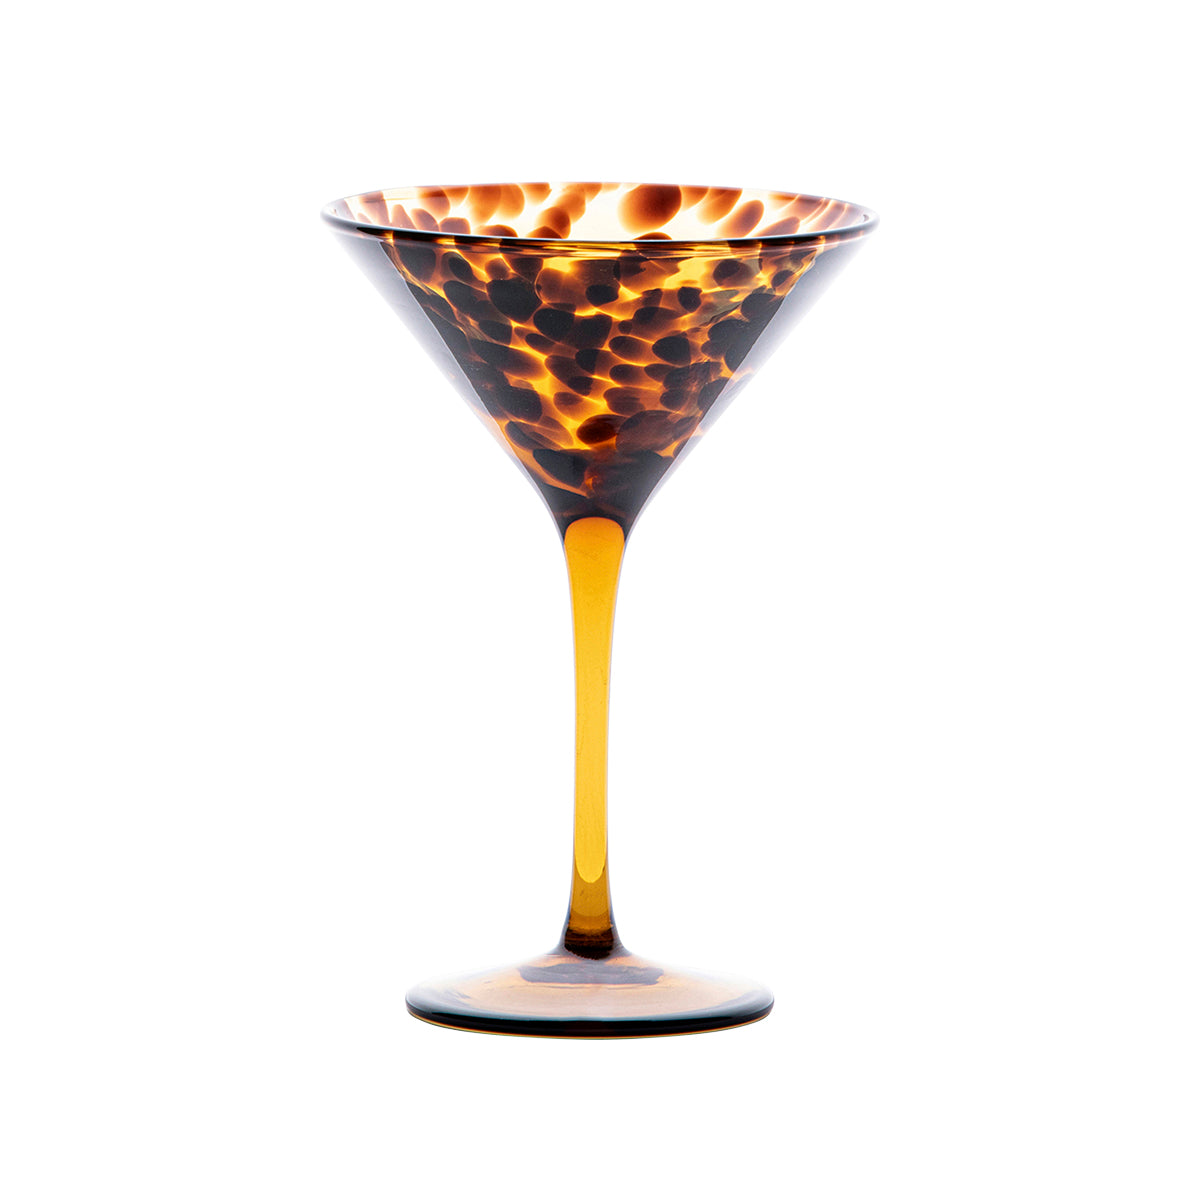 Richly hued wtih dark tortoiseshell specks, this handsome martini glass will help you channel your inner James Bond and serve up a shaken martini in true style. 